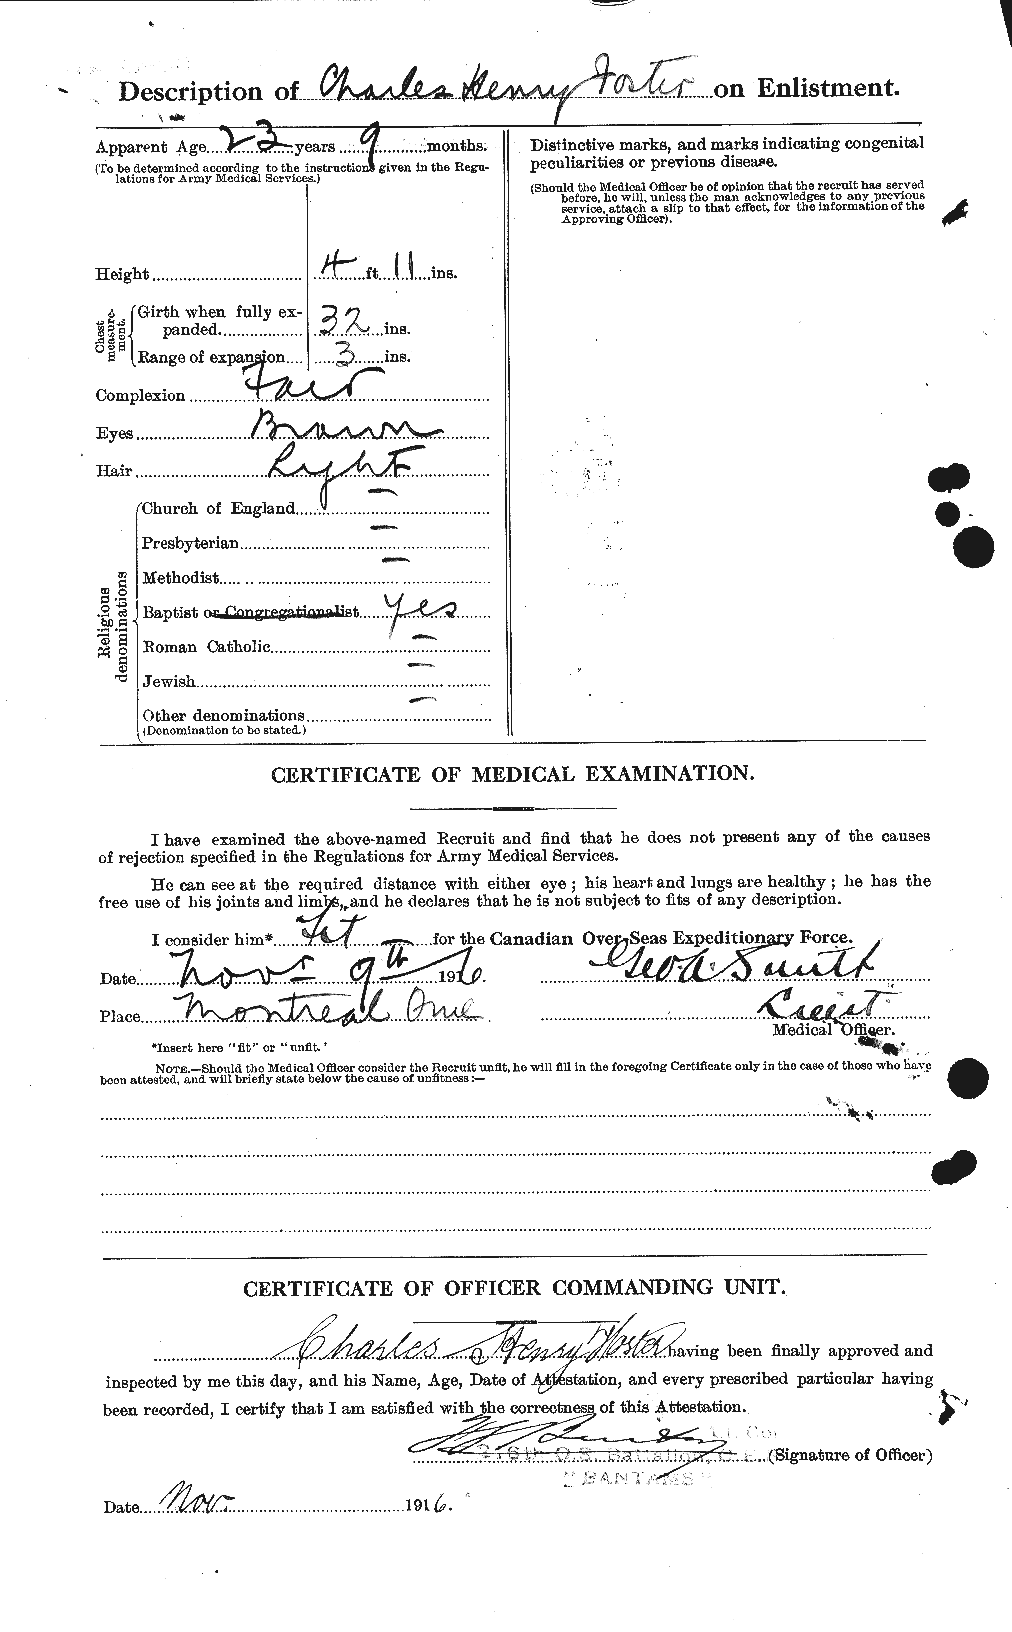 Personnel Records of the First World War - CEF 330518b